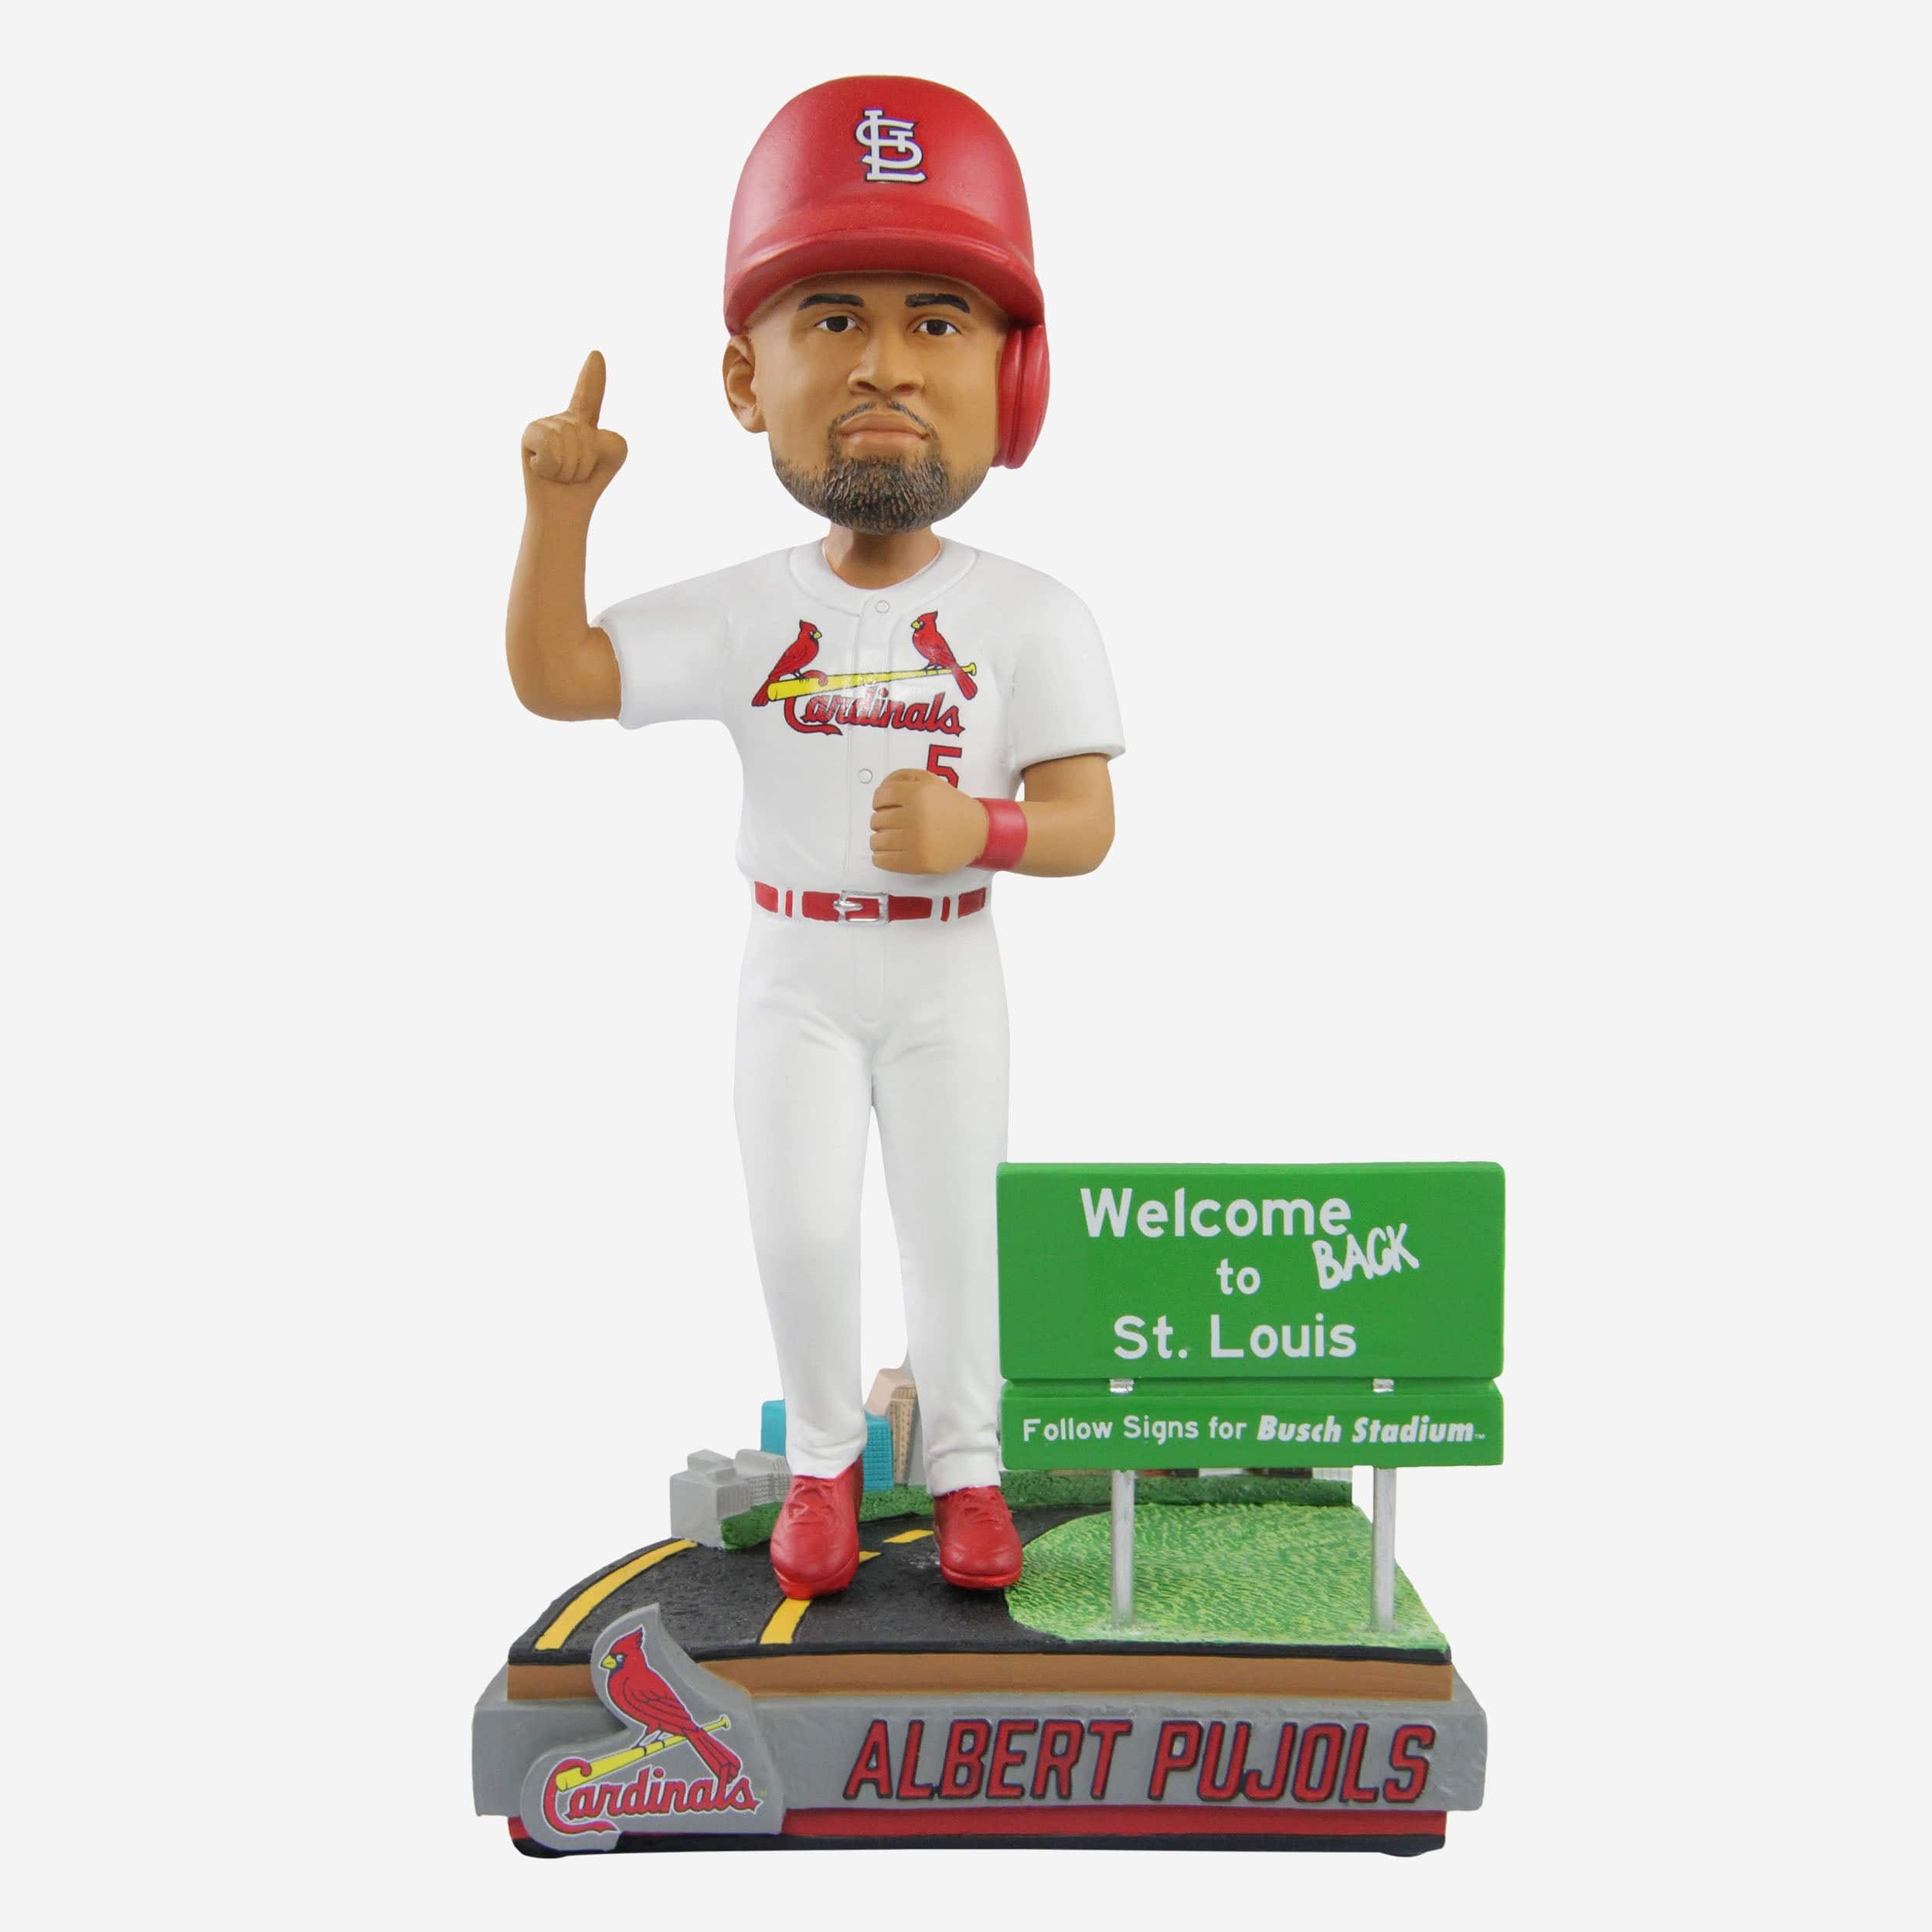 CARDINALS ANNOUNCE ADDITION OF ALBERT PUJOLS BOBBLEHEAD TO PROMO SCHEDULE  ON SEPTEMBER 18